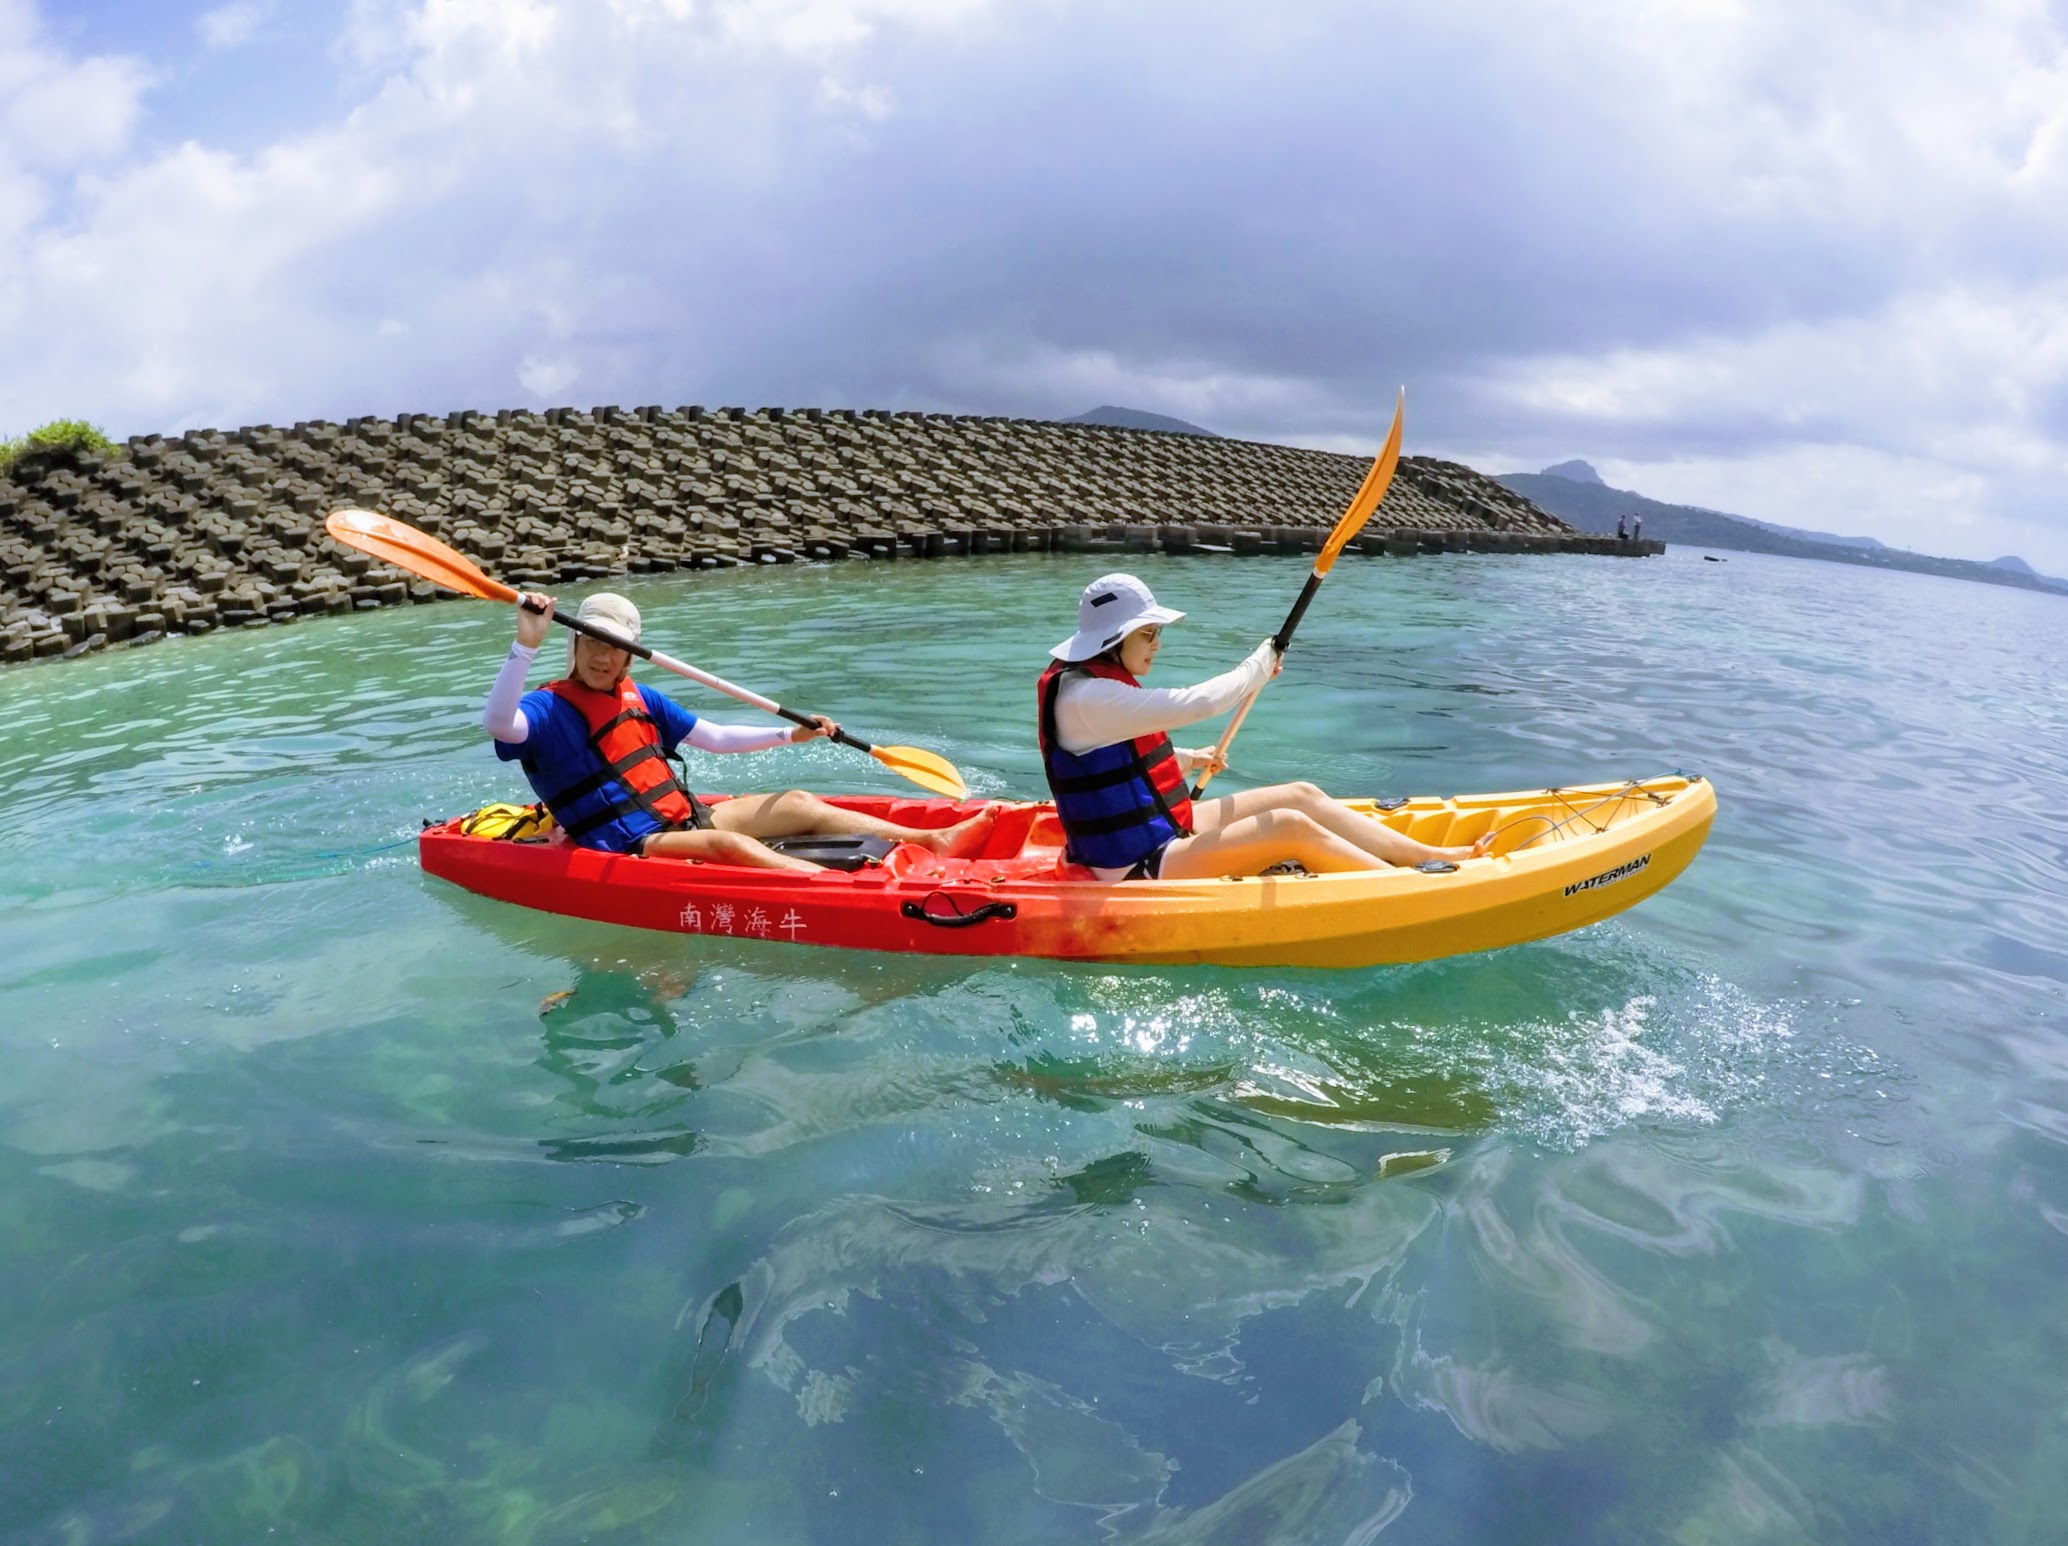 Pingtung: Kenting Nanwan Jet Ski Towing + Canoe / SUP Stand Up Paddle Experience (2-in-1)